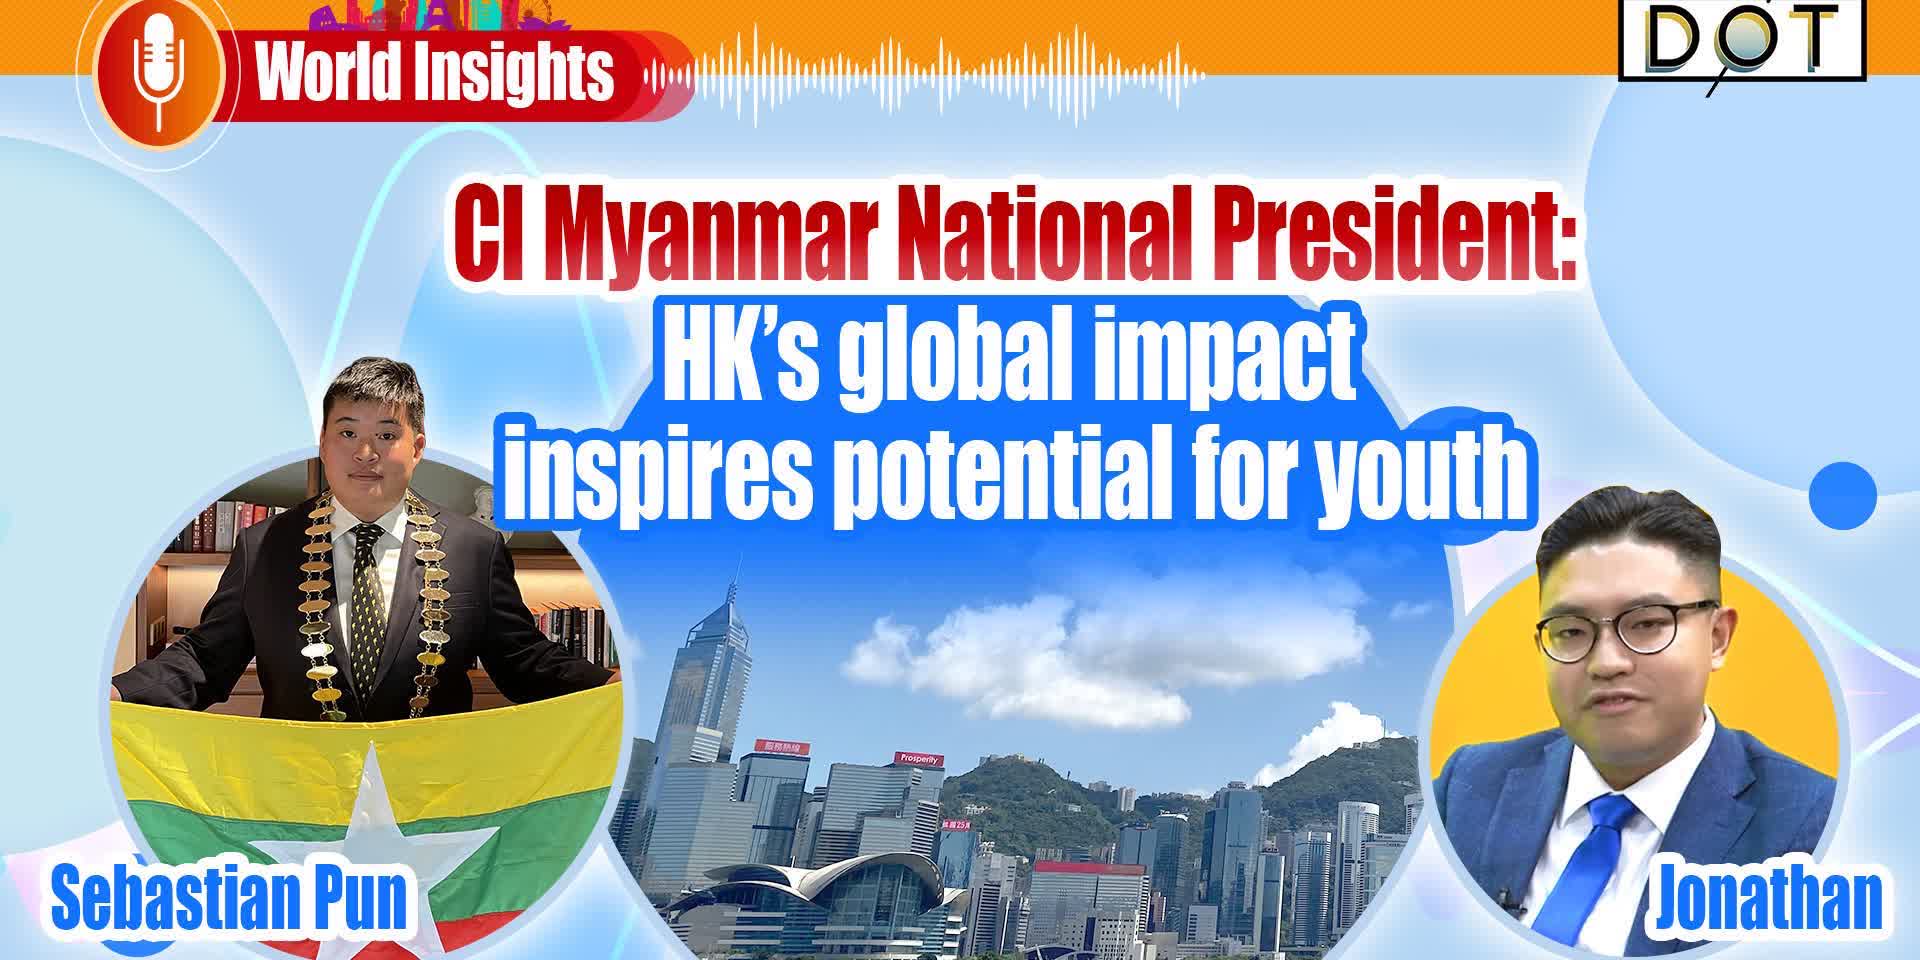 World Insights | JCI Myanmar National President: HK’s global impact inspires potential for youth